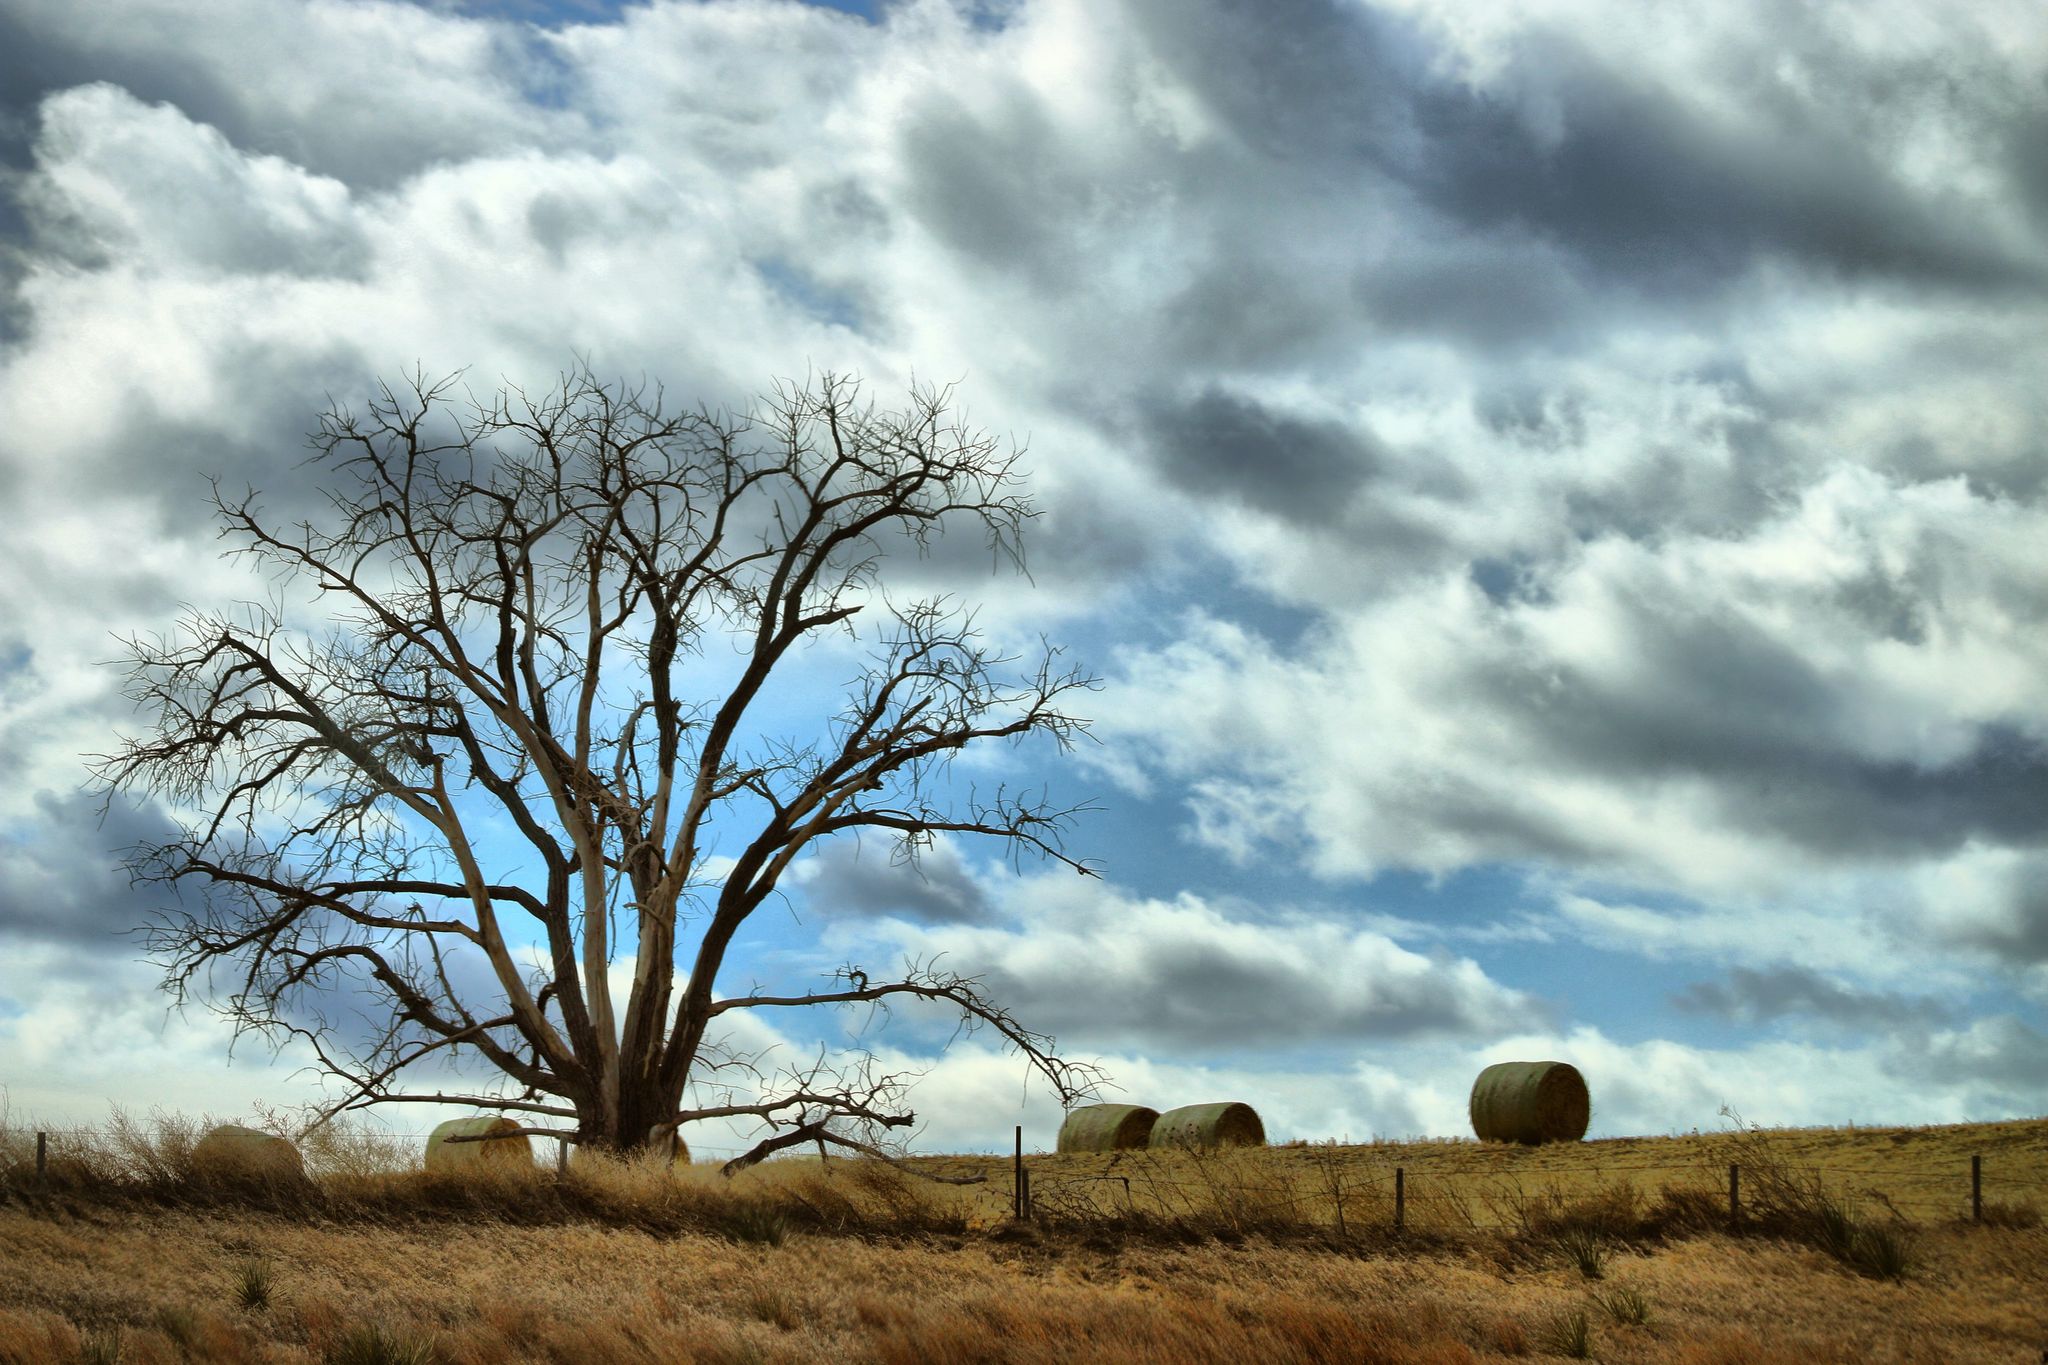 Kansas sky with beautiful clouds. Bare trees and hay bales.